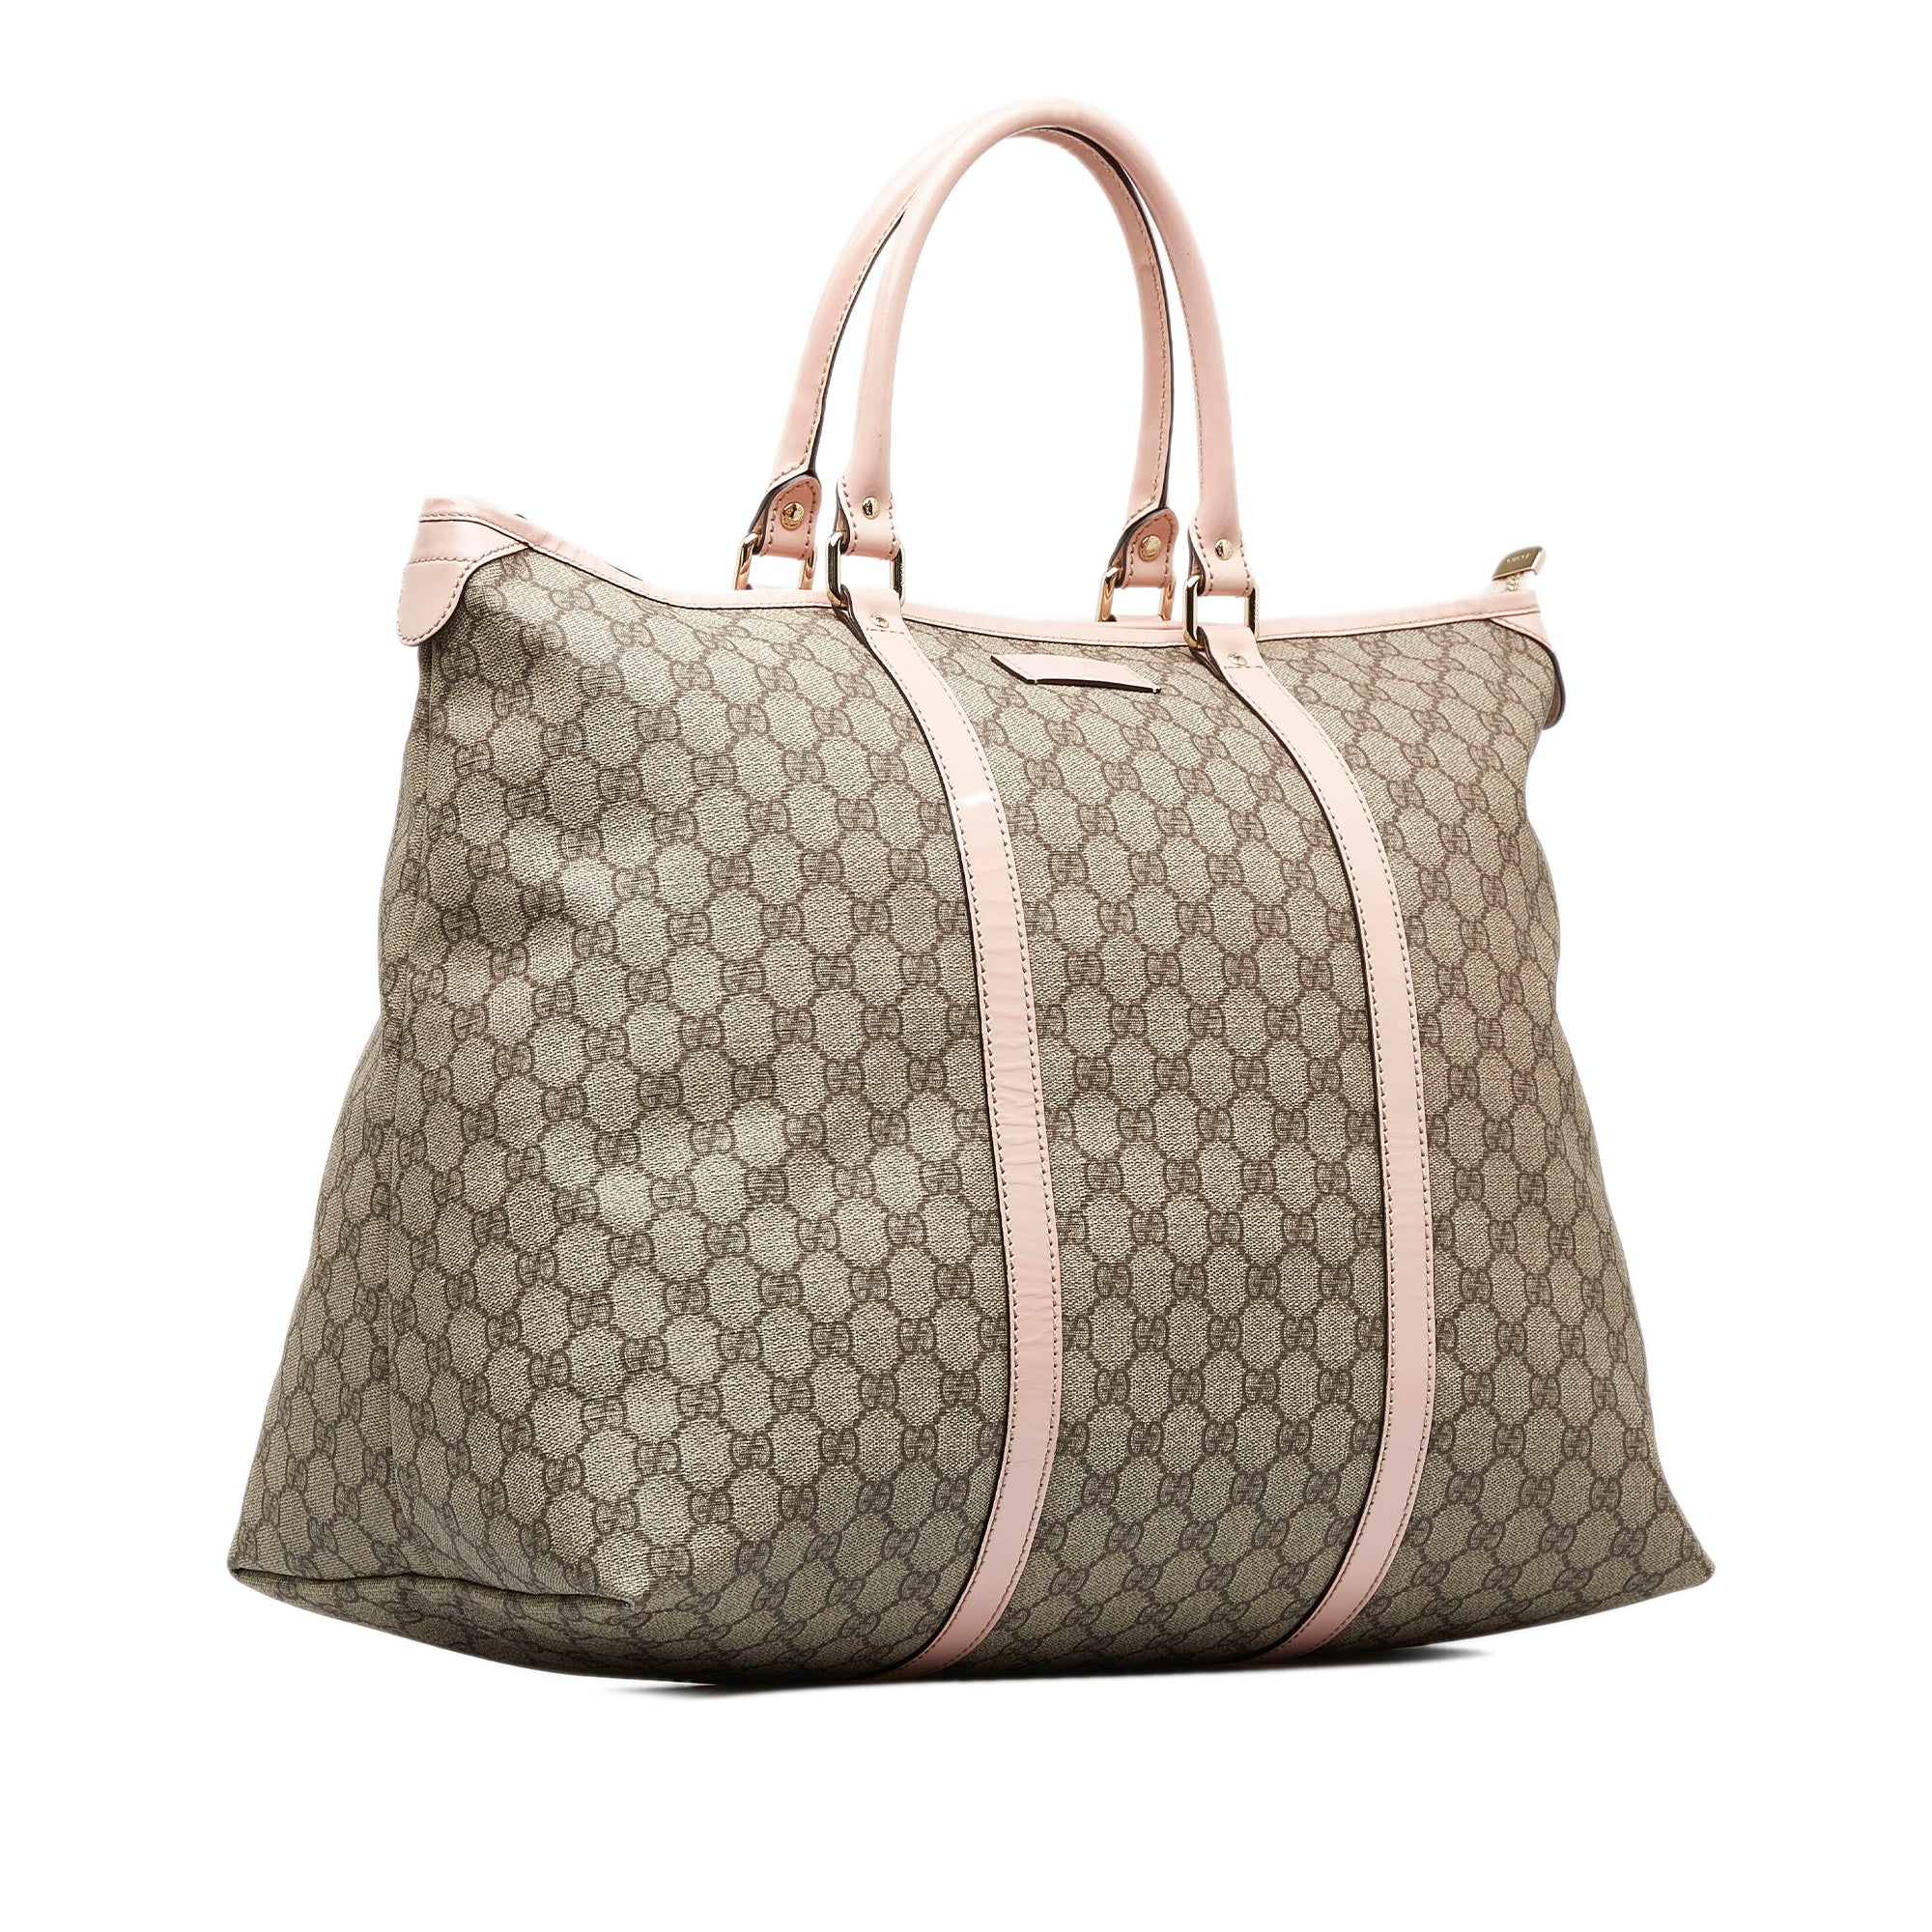 Gucci GG Canvas Handbag  Canvas handbags, Handbag, Reversible leather